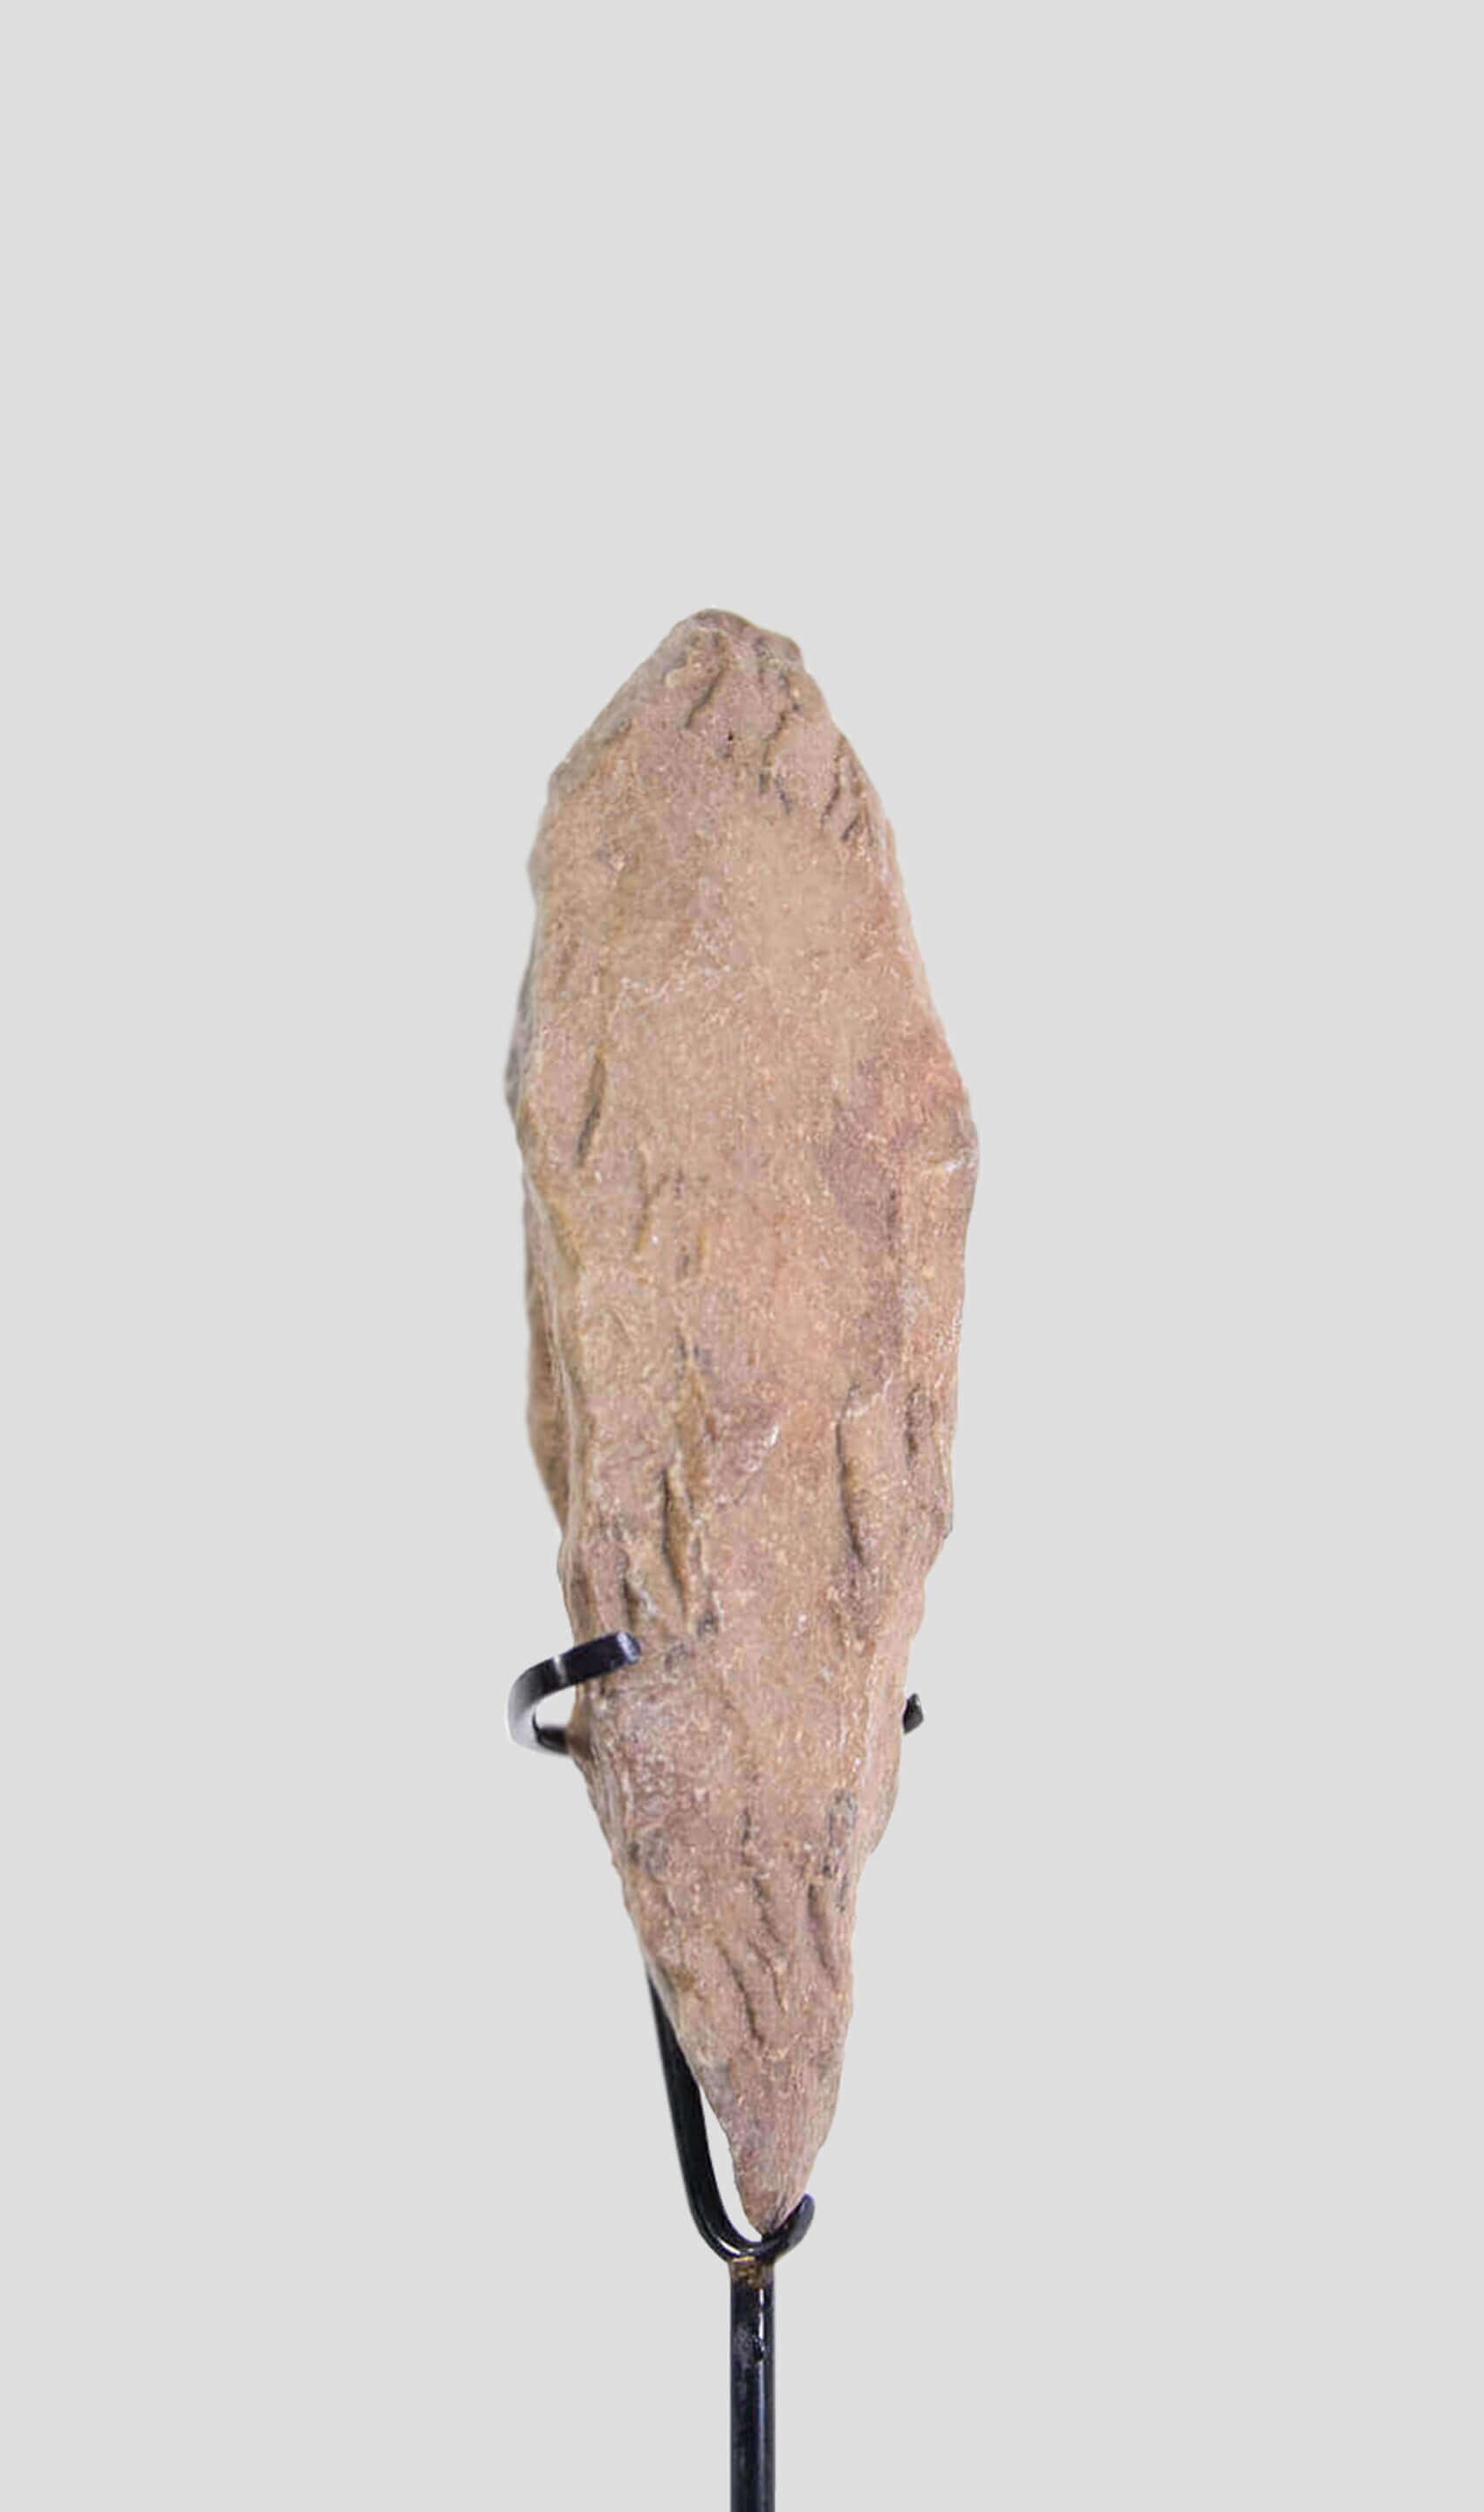 Artefact Palaeolithic Acheulean Hand Axe [10,000 BC] 300mm